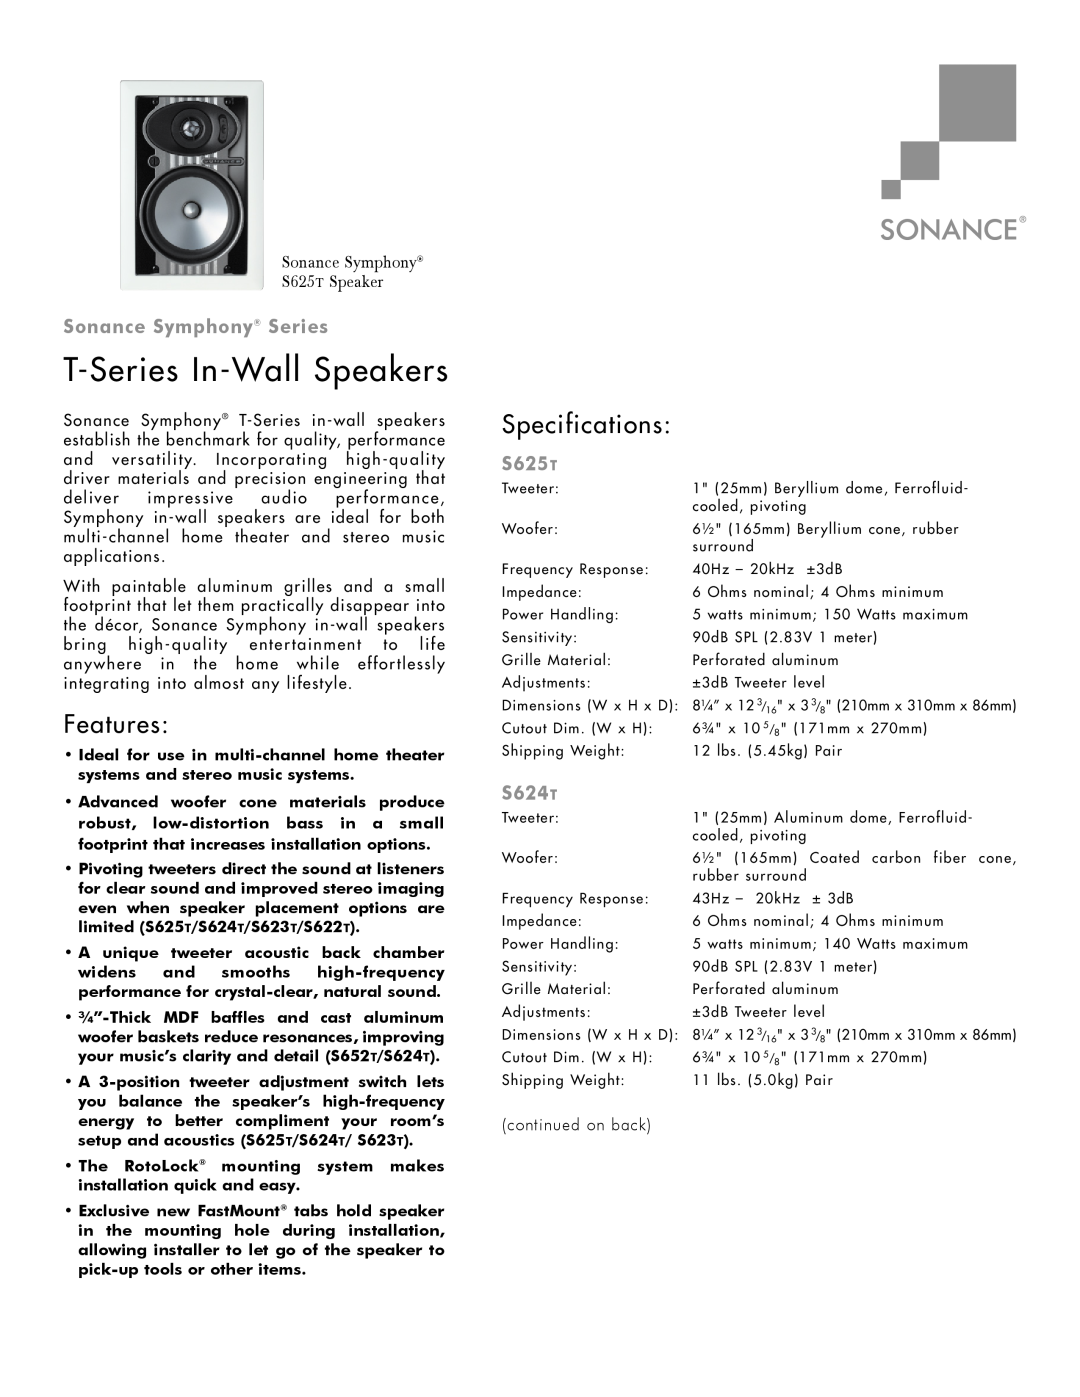 Sonance S624T specifications T-Series In-WallSpeakers, Features, Specifications, Sonance Symphony Series, S625T 